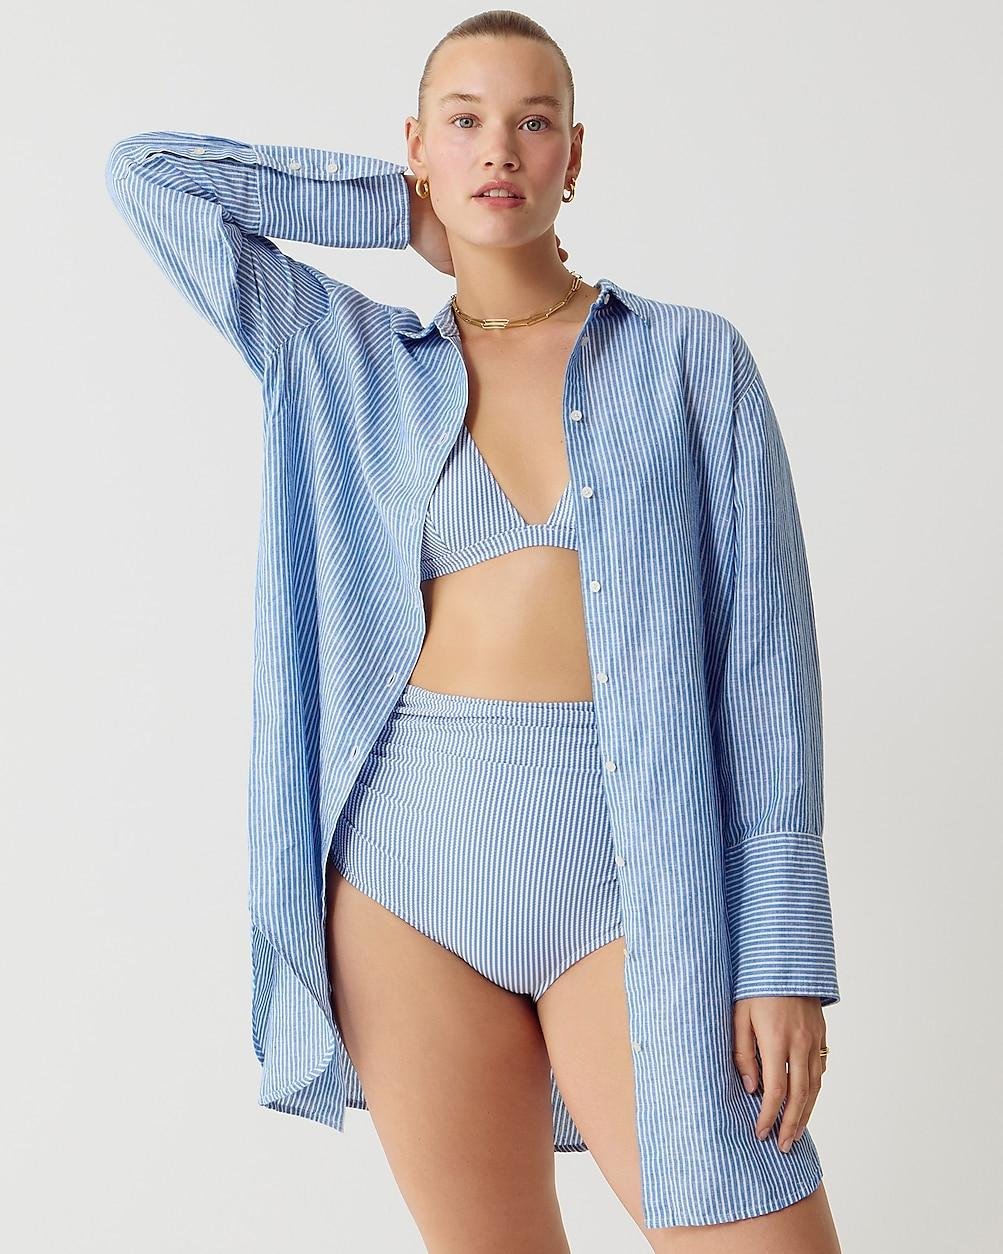 Relaxed-fit beach shirt in striped linen-cotton blend by J.CREW